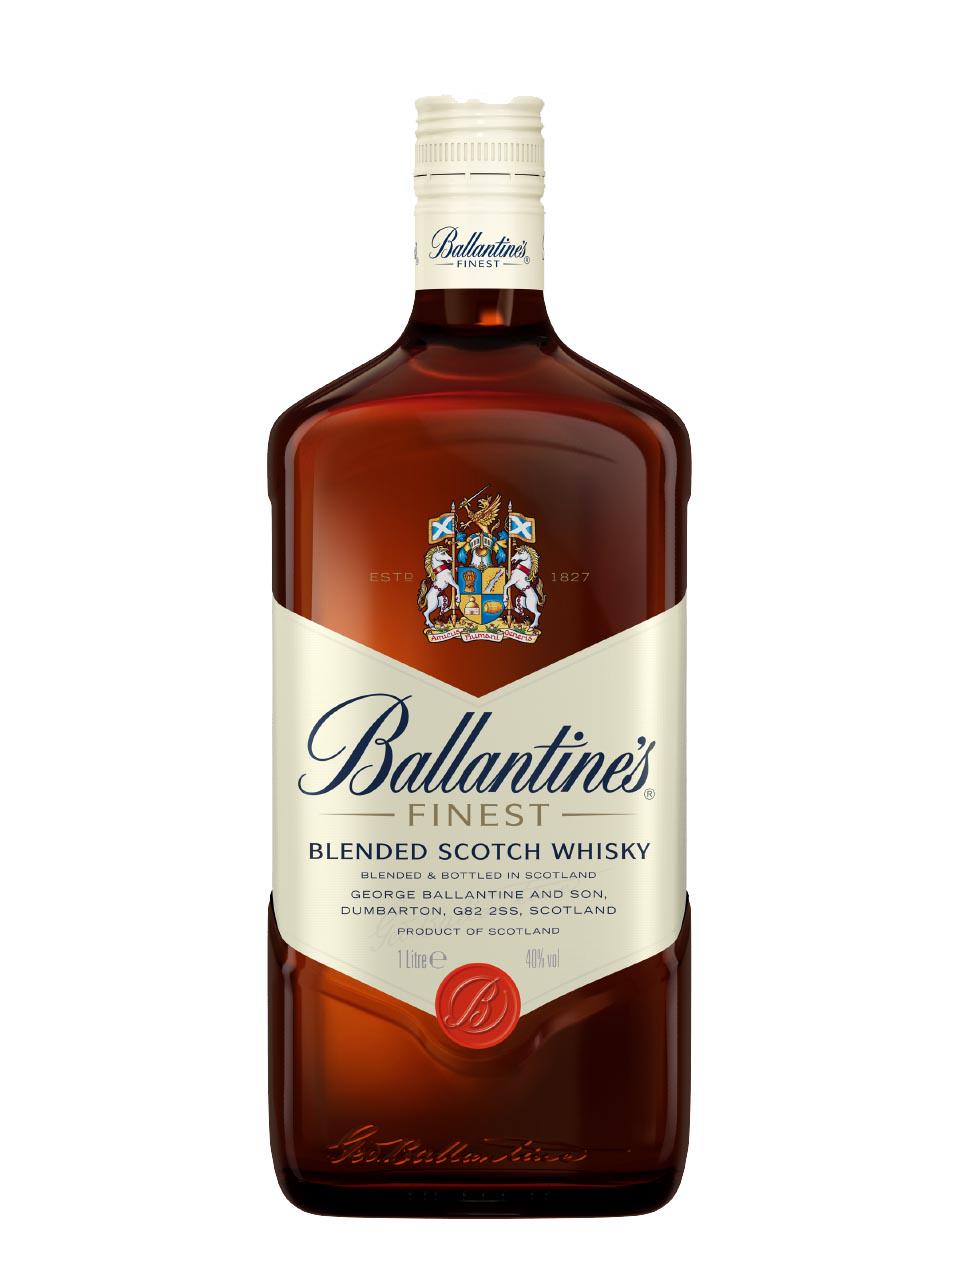 Buy Ballantine's 30 Year Old Blended Scotch Whisky 43% Release